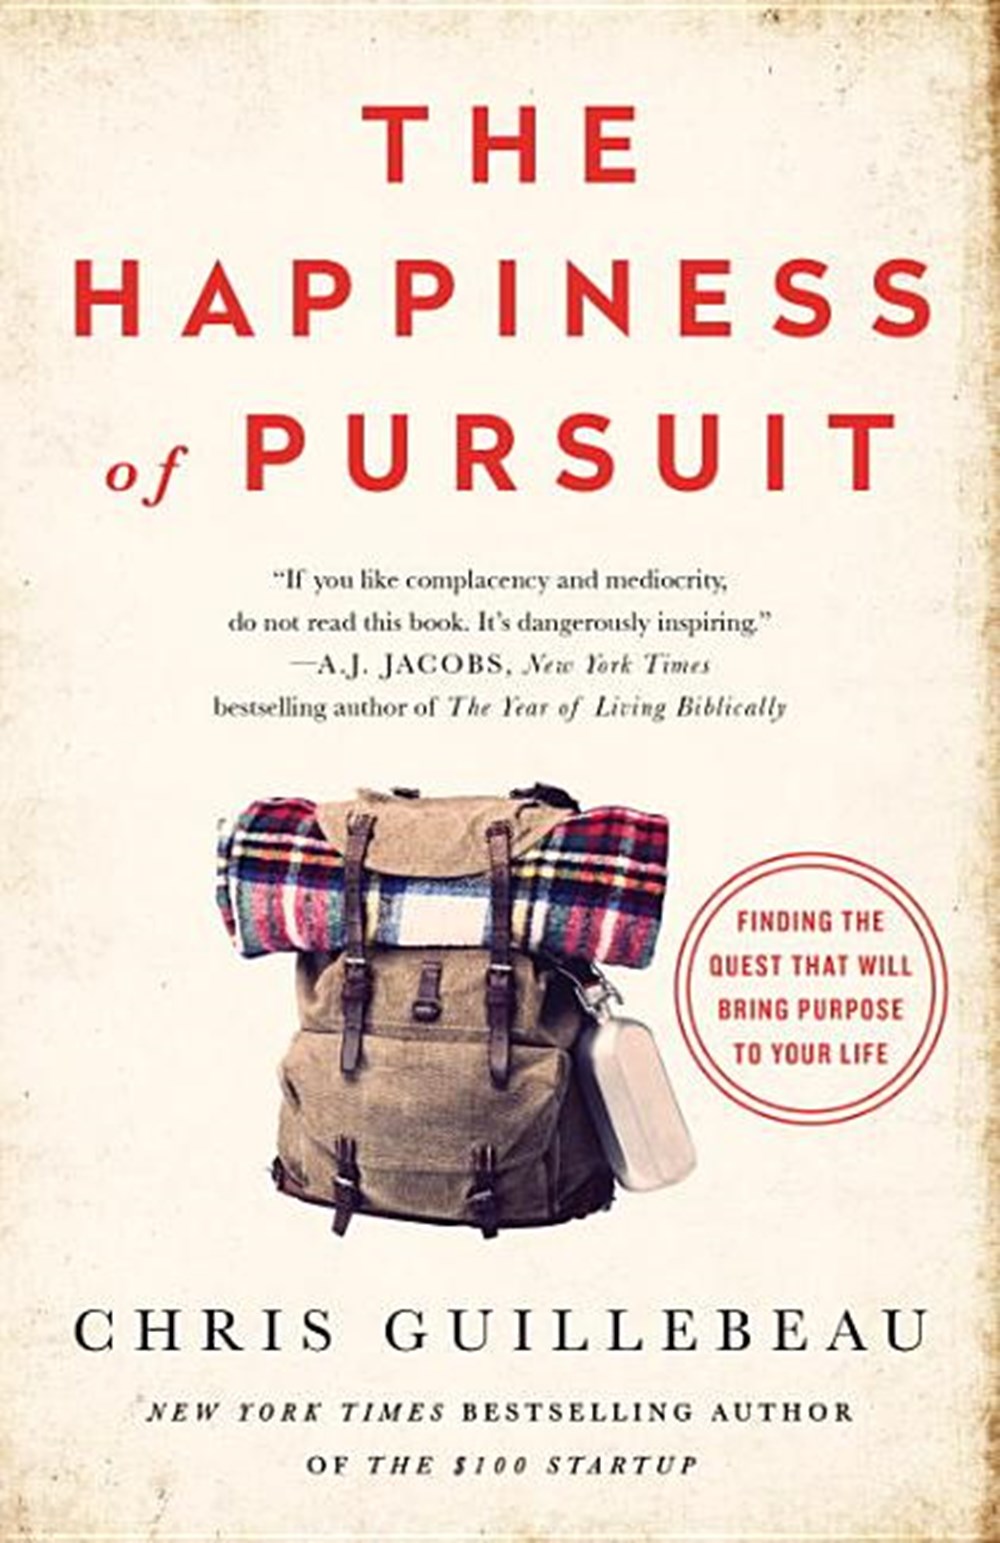 Happiness of Pursuit: Finding the Quest That Will Bring Purpose to Your Life